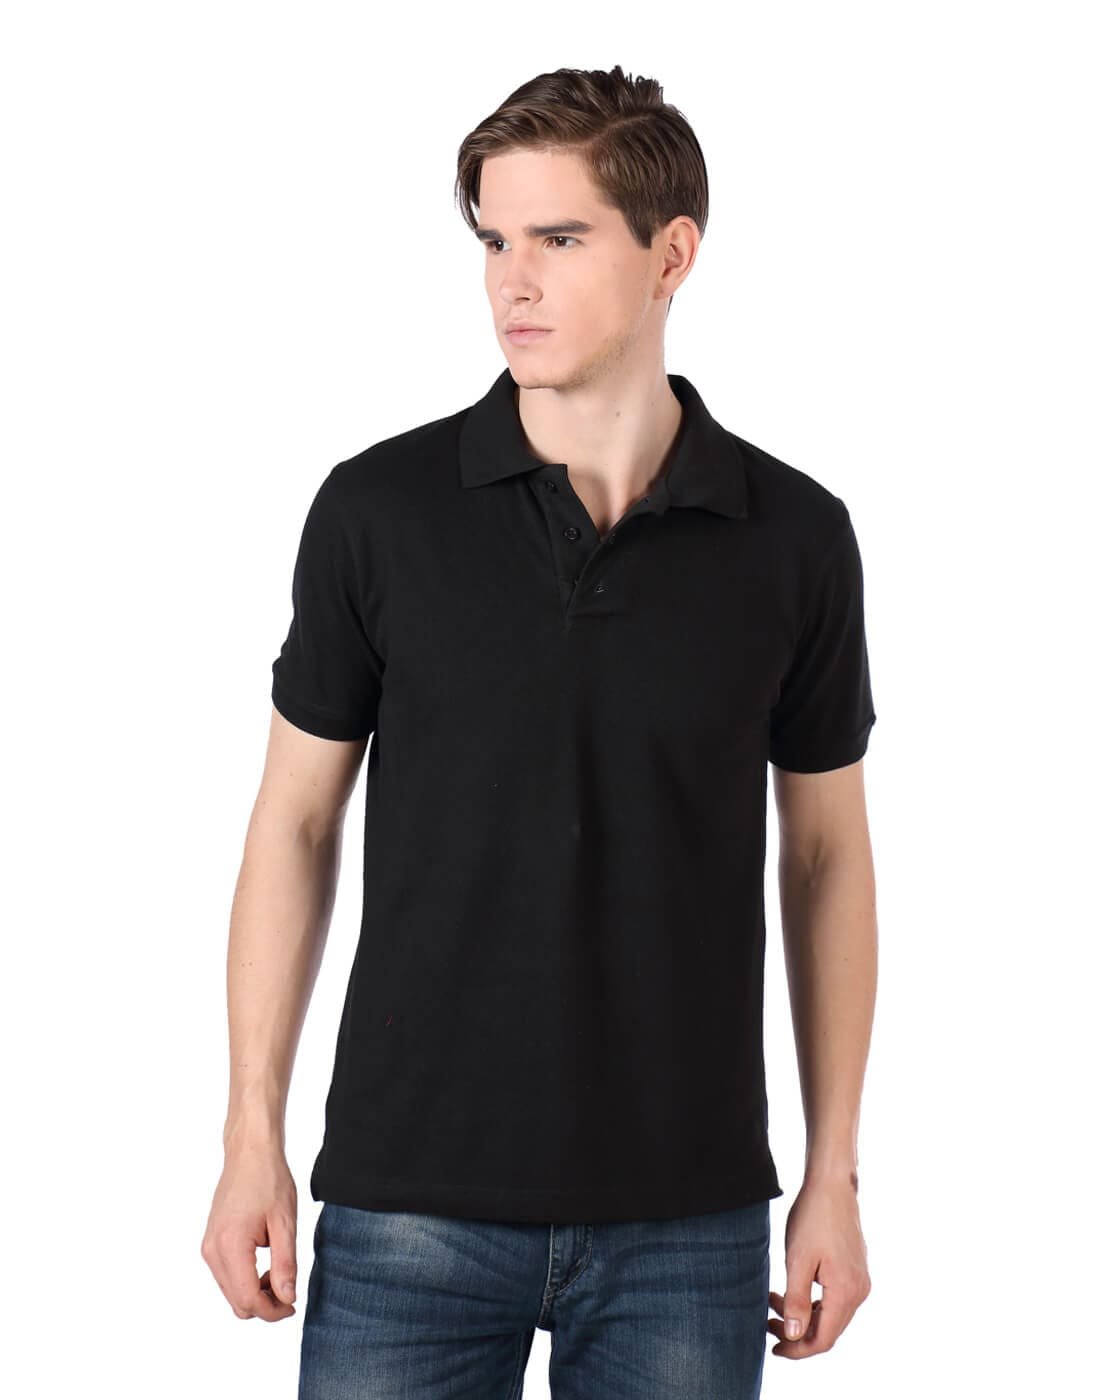 Buy Best Plain Polo T-Shirts At Best Prices On Cash On Delivery ...